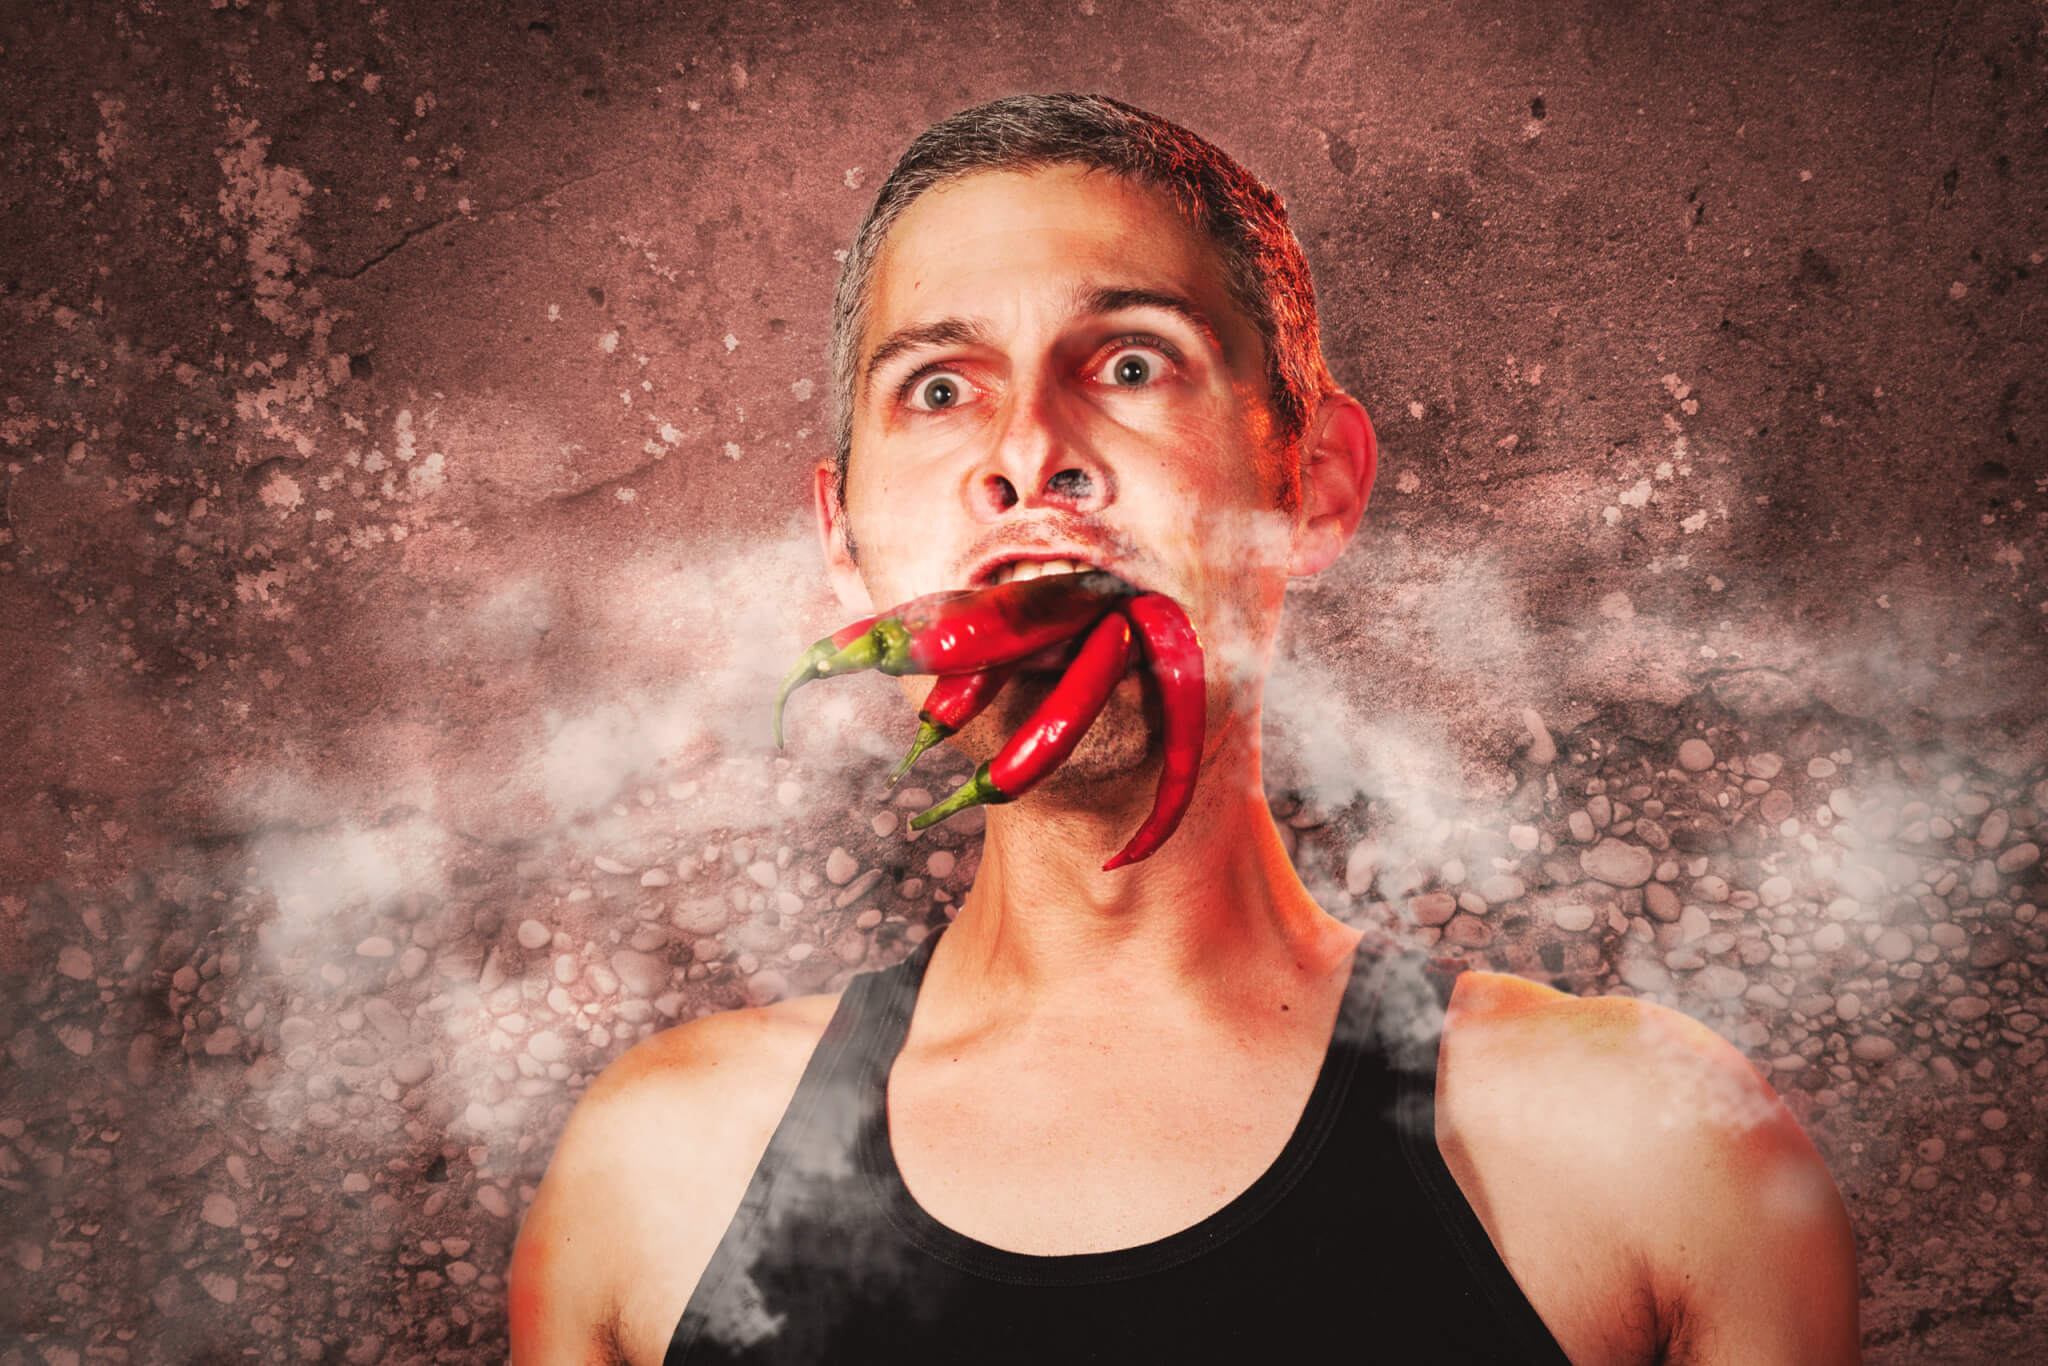 Man eating spicy hot peppers